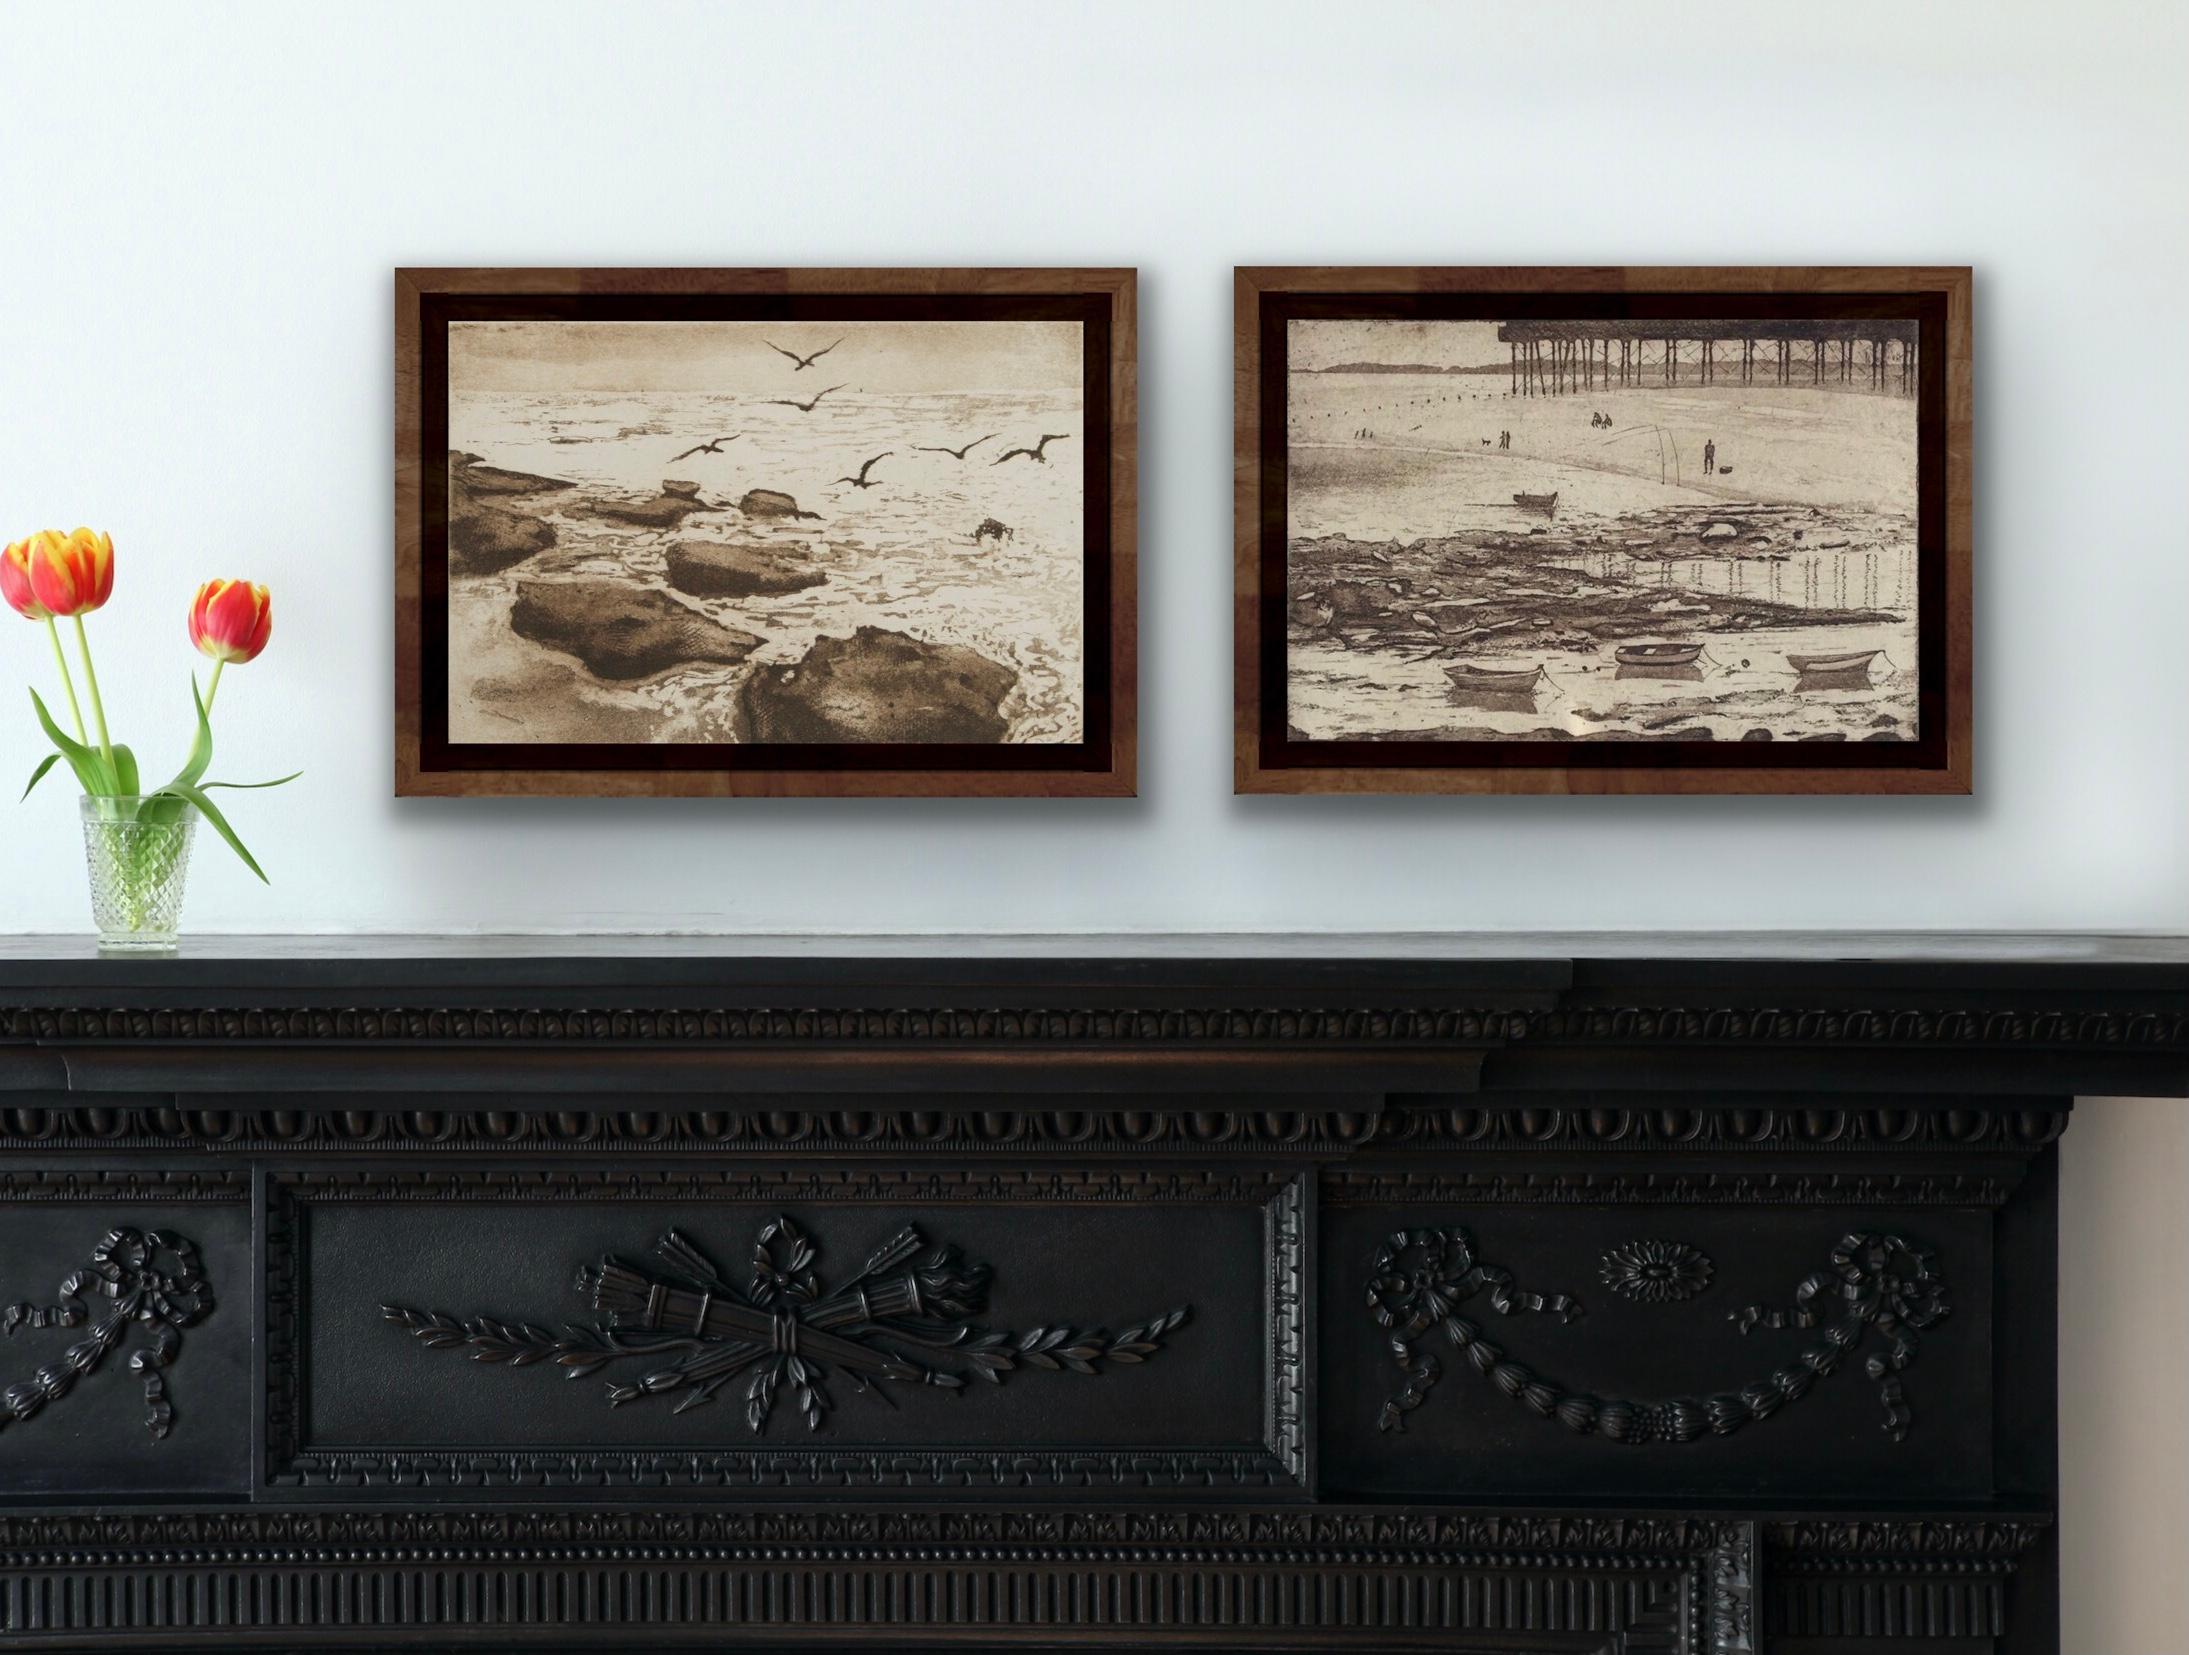 Sea Birds and Beach Life diptych - Gray Landscape Print by Tim Southall